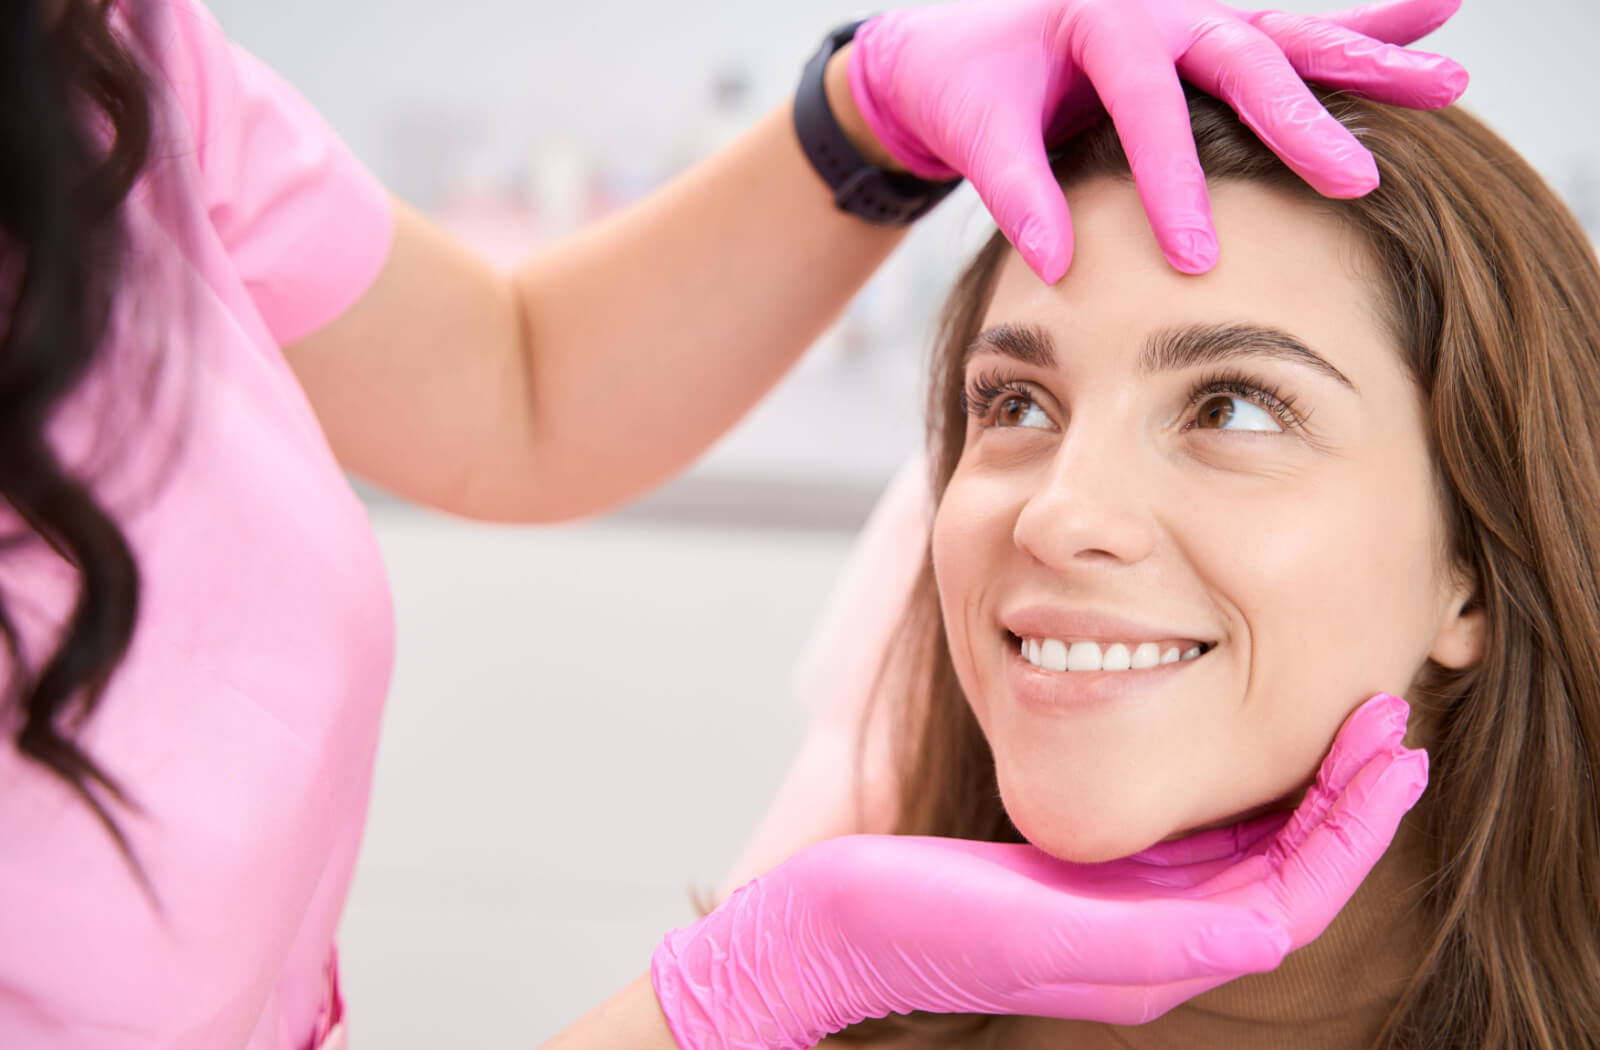 A woman smiling while being professionally examined by a cosmetologist.